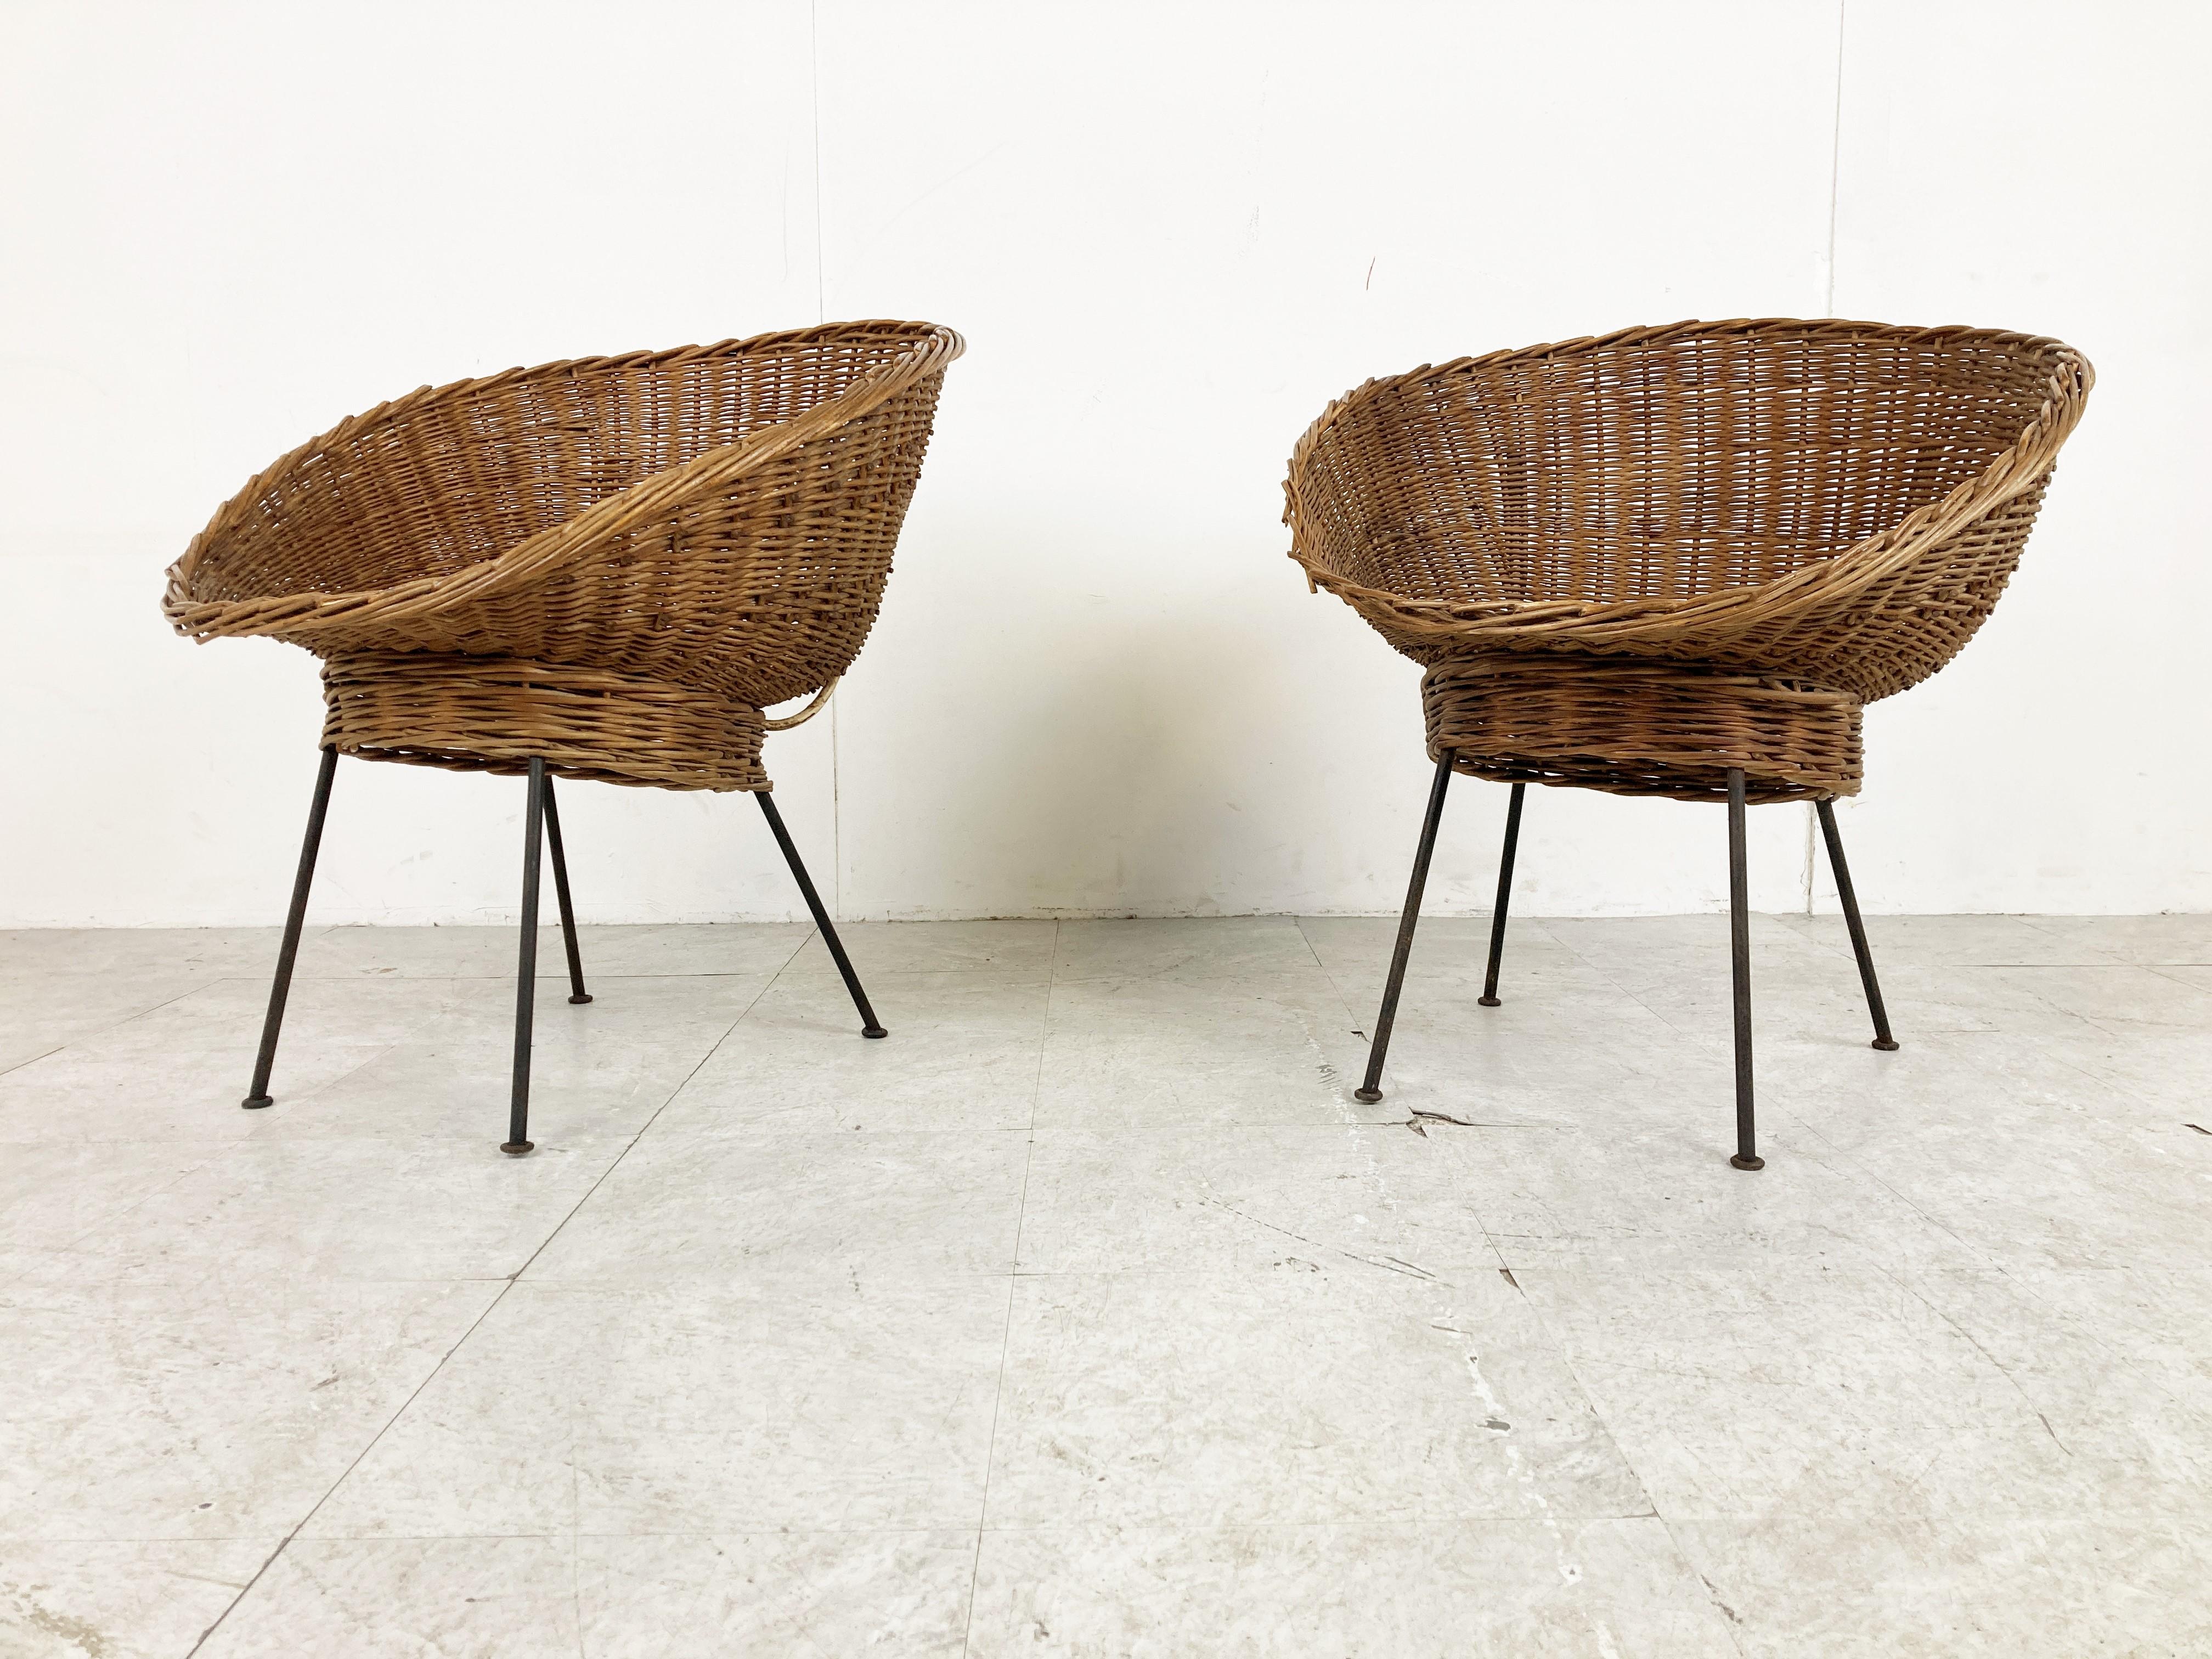 Vintage Italian Wicker Lounge Chairs, Set of 2, 1960s For Sale 1